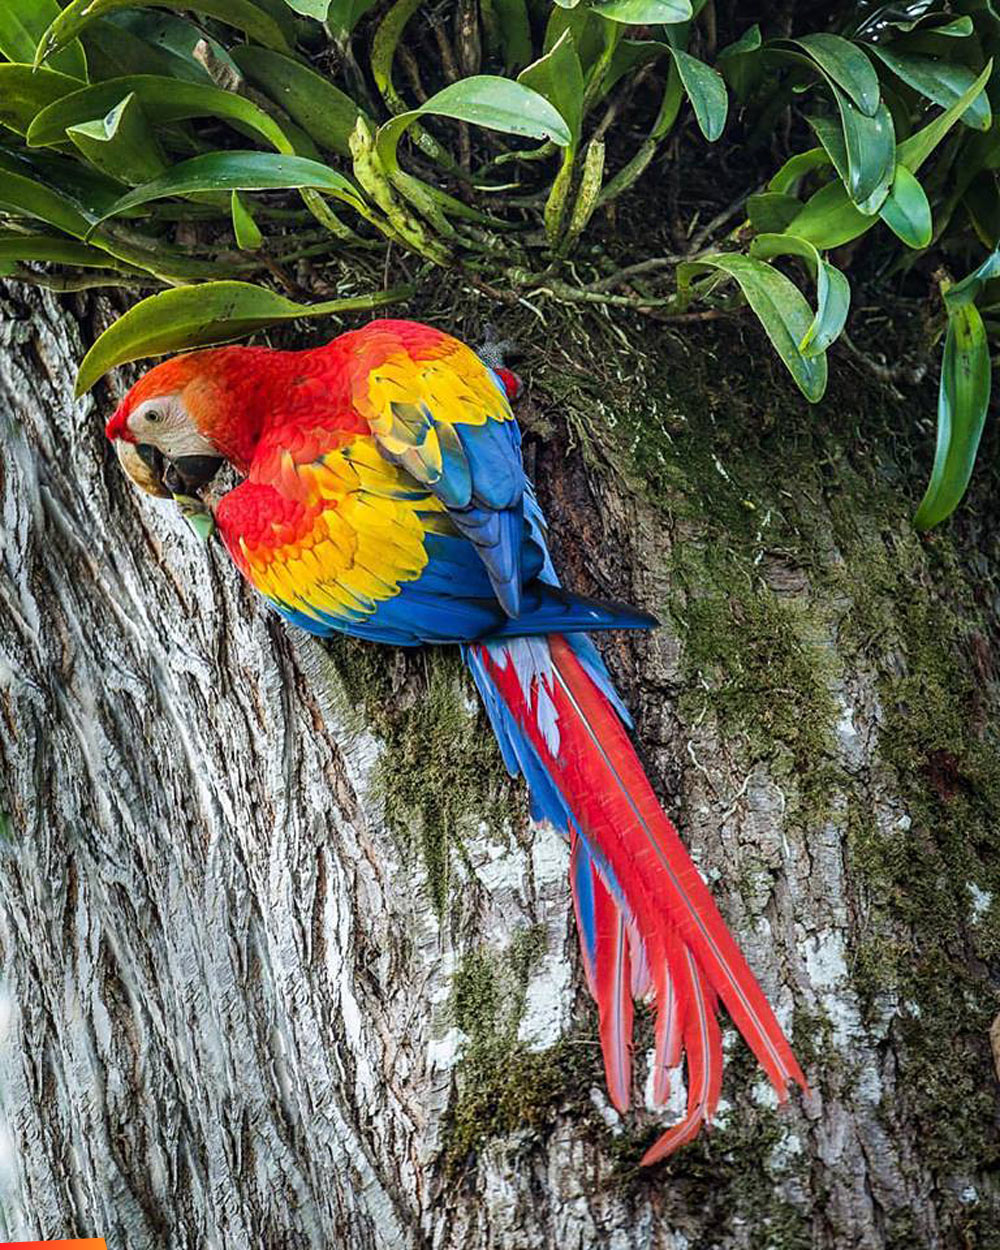 The endangered scarlet macaw feeding among bromeliads on a tree trunk